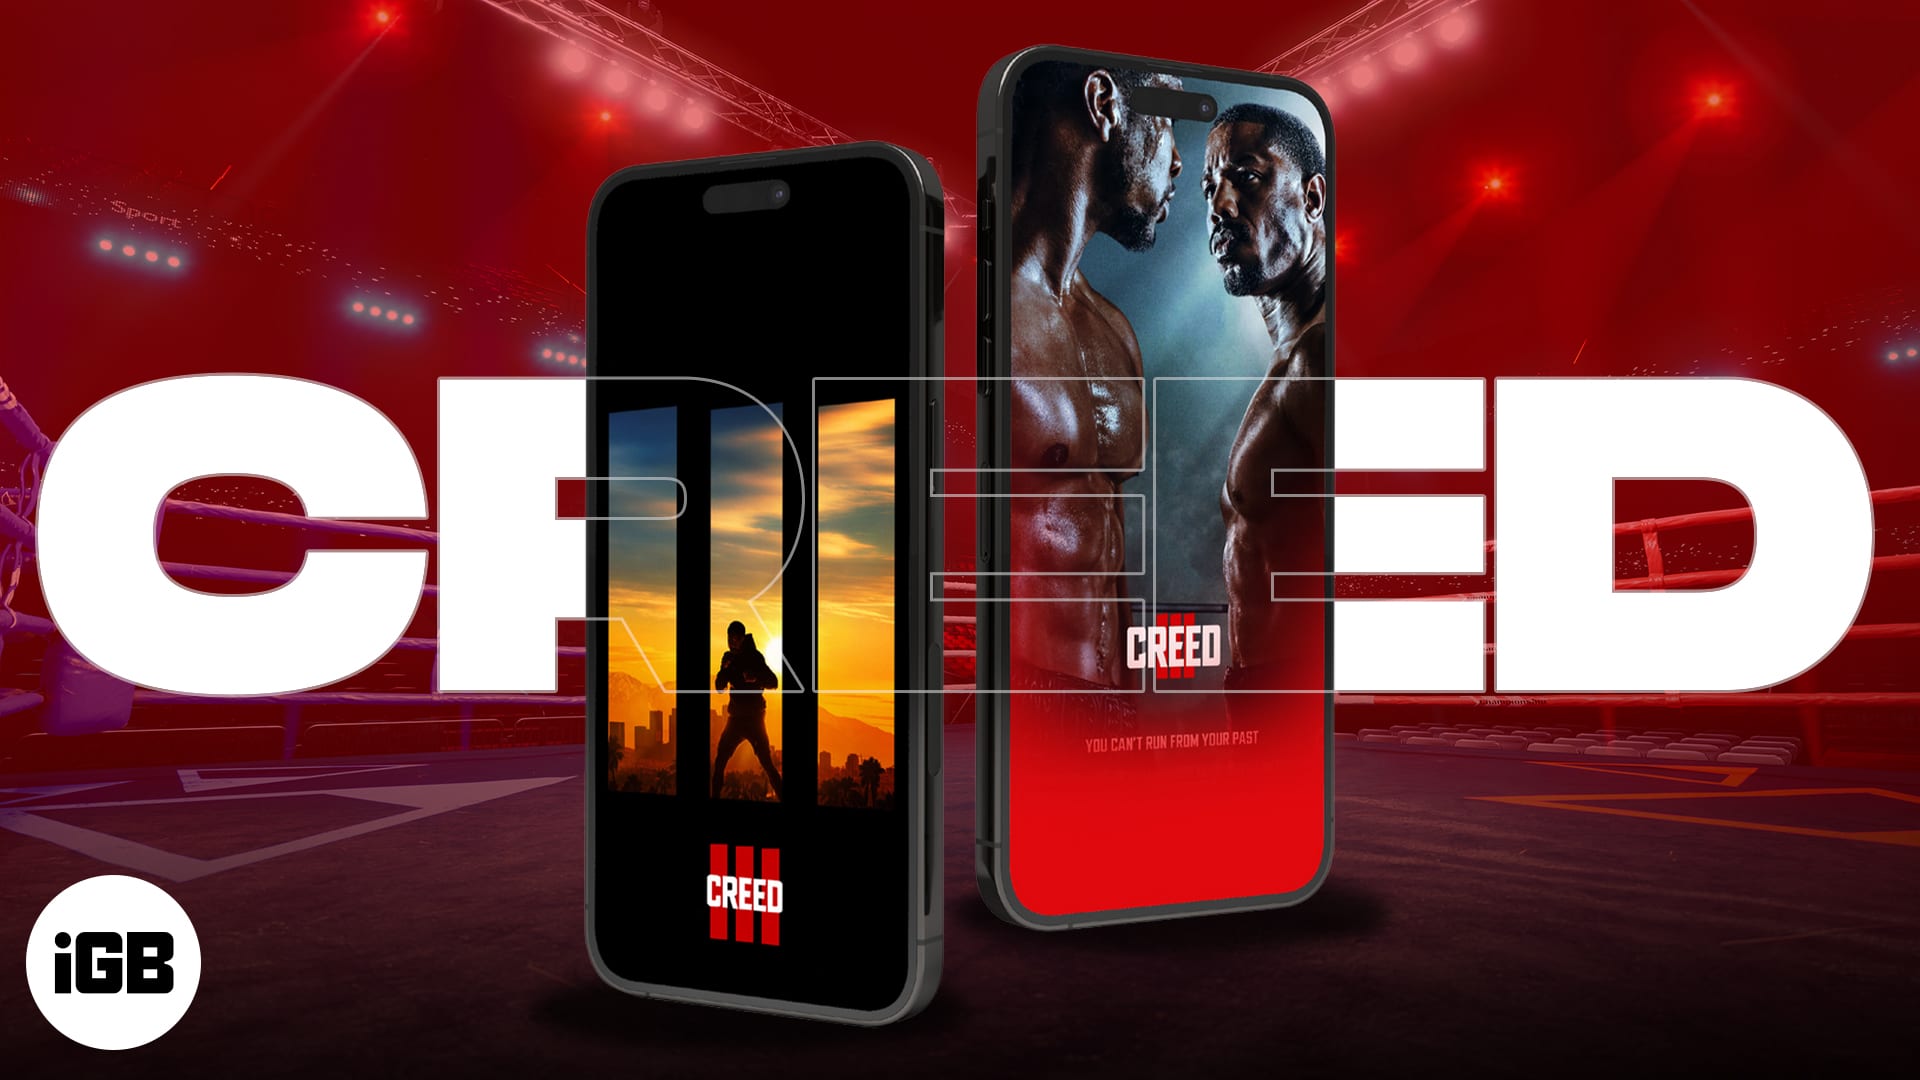 Best Adonis Creed wallpapers for iPhone